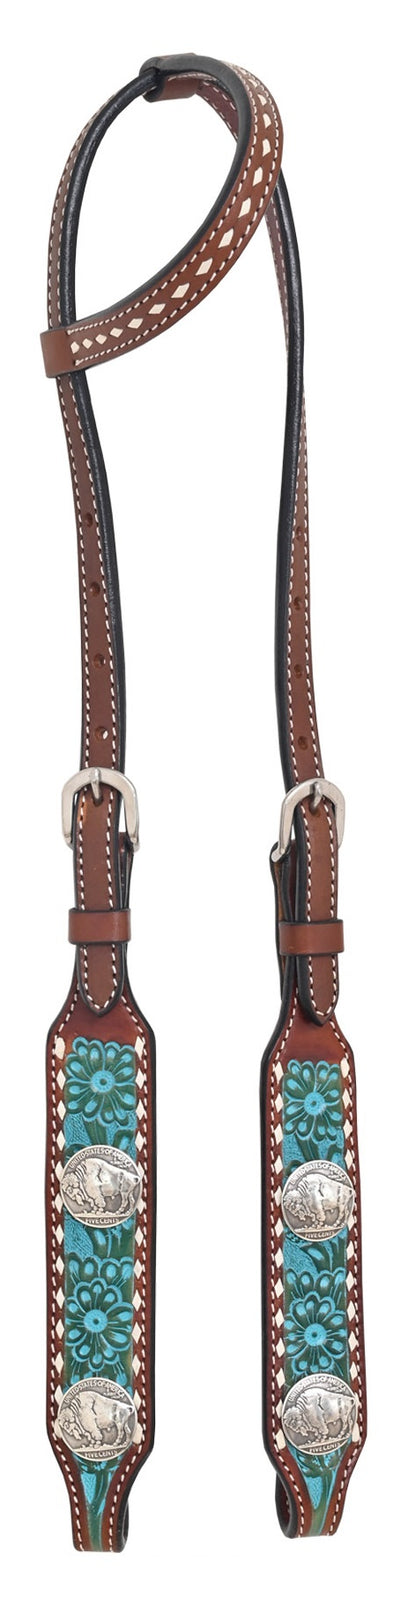 Rafter T One Ear Headstall w/Floral Tooling & White Buckstitch